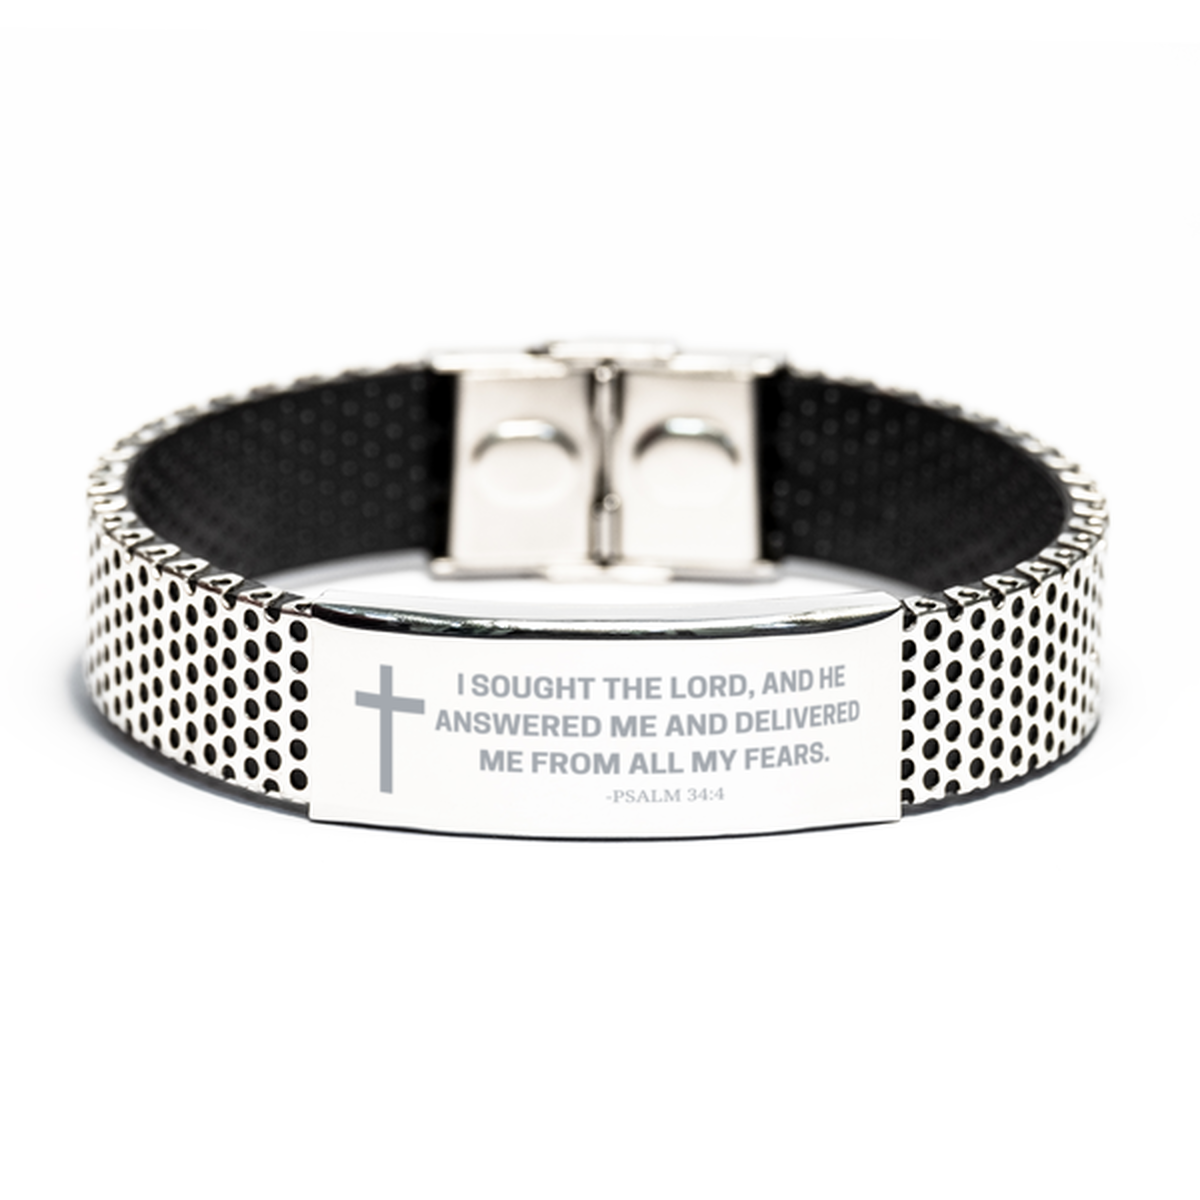 Baptism Gifts For Teenage Boys Girls, Christian Bible Verse Stainless Steel Bracelet, I sought the Lord, Catholic Confirmation Gifts for Son, Godson, Grandson, Nephew